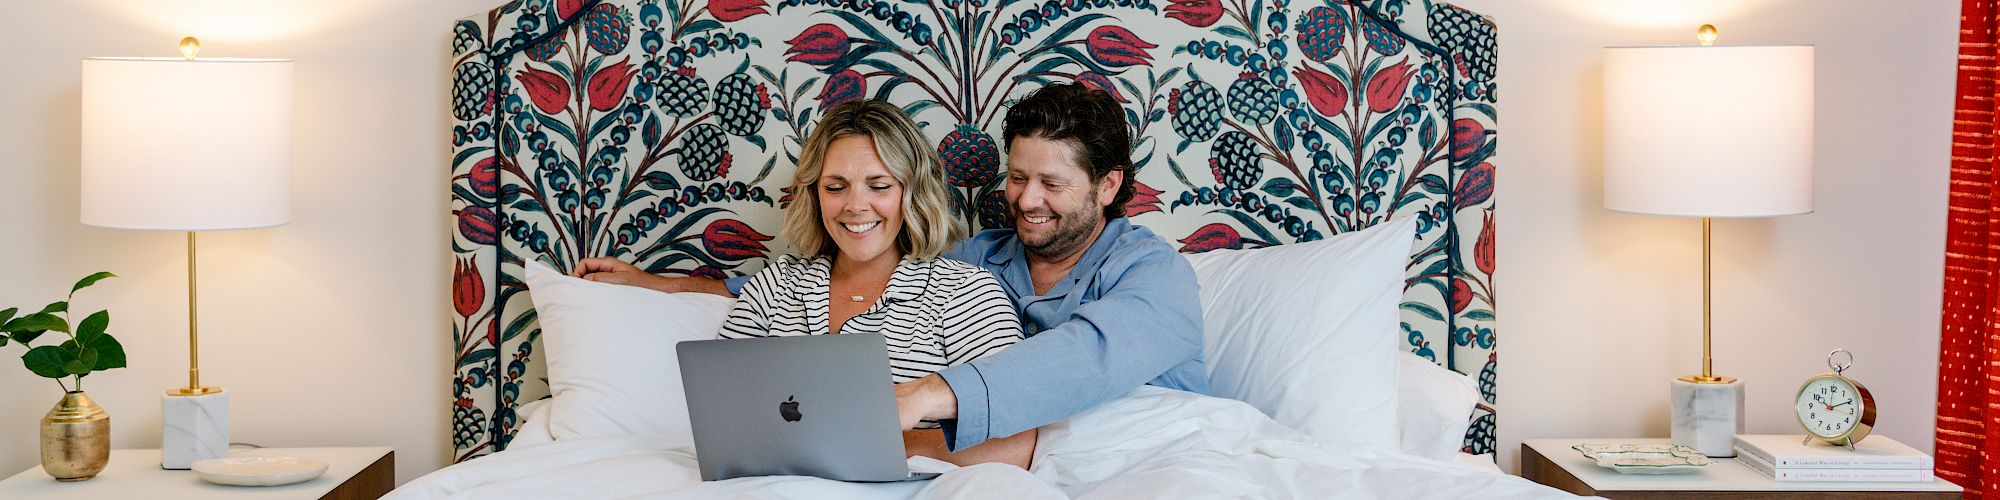 A couple is sitting in bed, sharing a laptop. The headboard has a floral pattern, with framed botanical prints and lamps on either side.